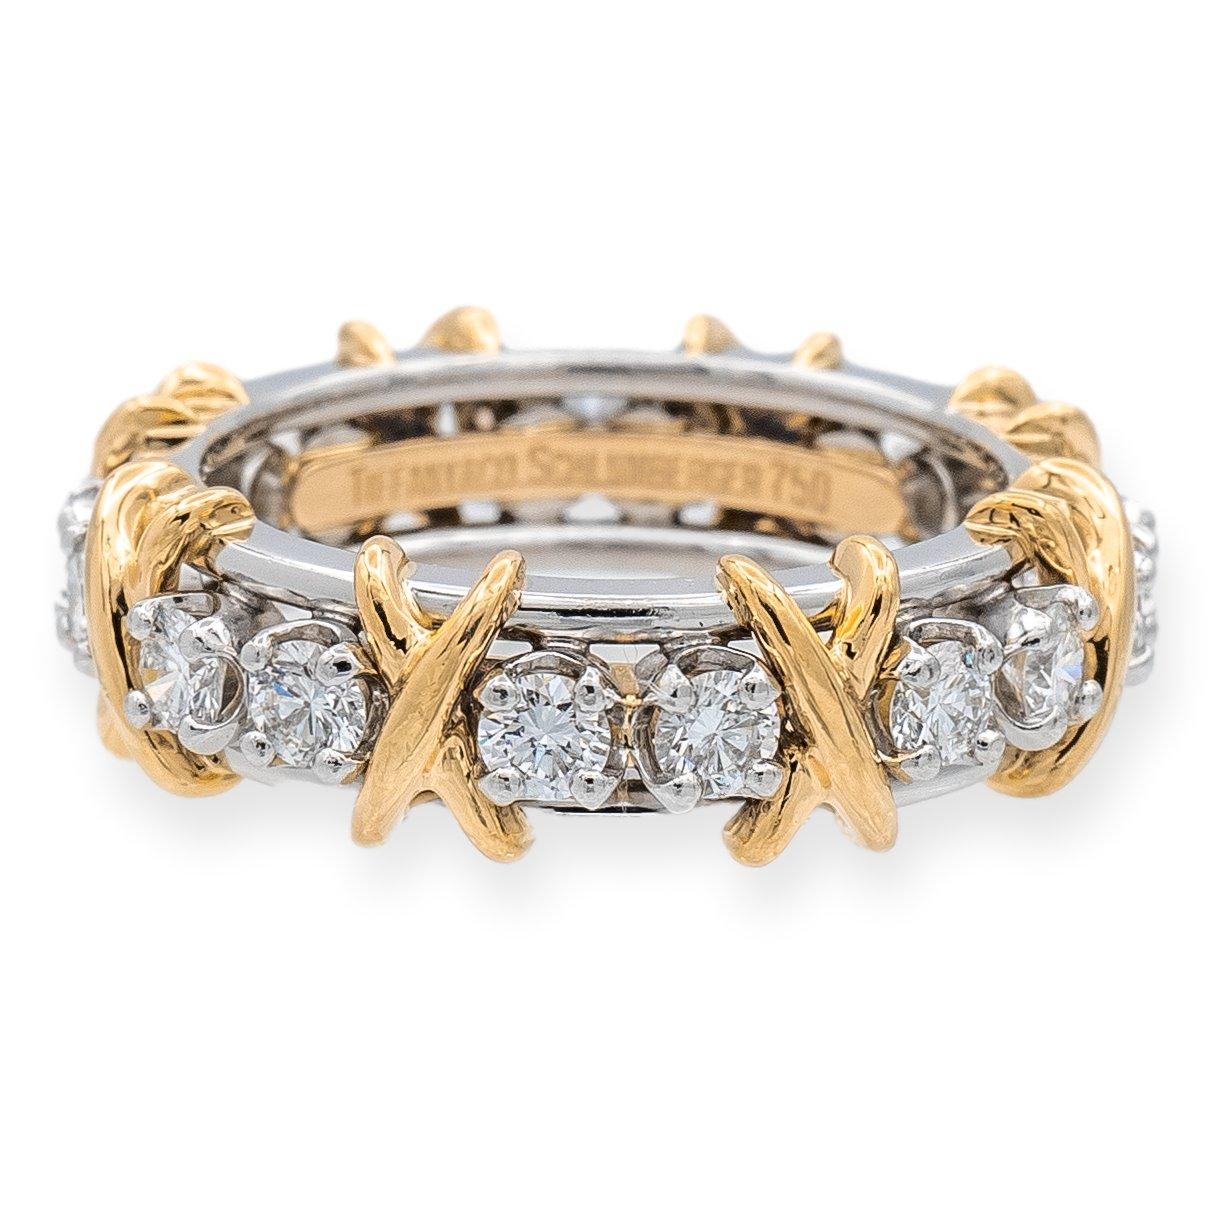 Tiffany & Co. band ring designed by Jean Schlumberger finely crafted Platinum and 18 Karat yellow gold featuring 16 round brilliant cut diamonds weighing 1.18 carats total weight approximately in D-G color range and very fine VVS-VS clarity. Fully